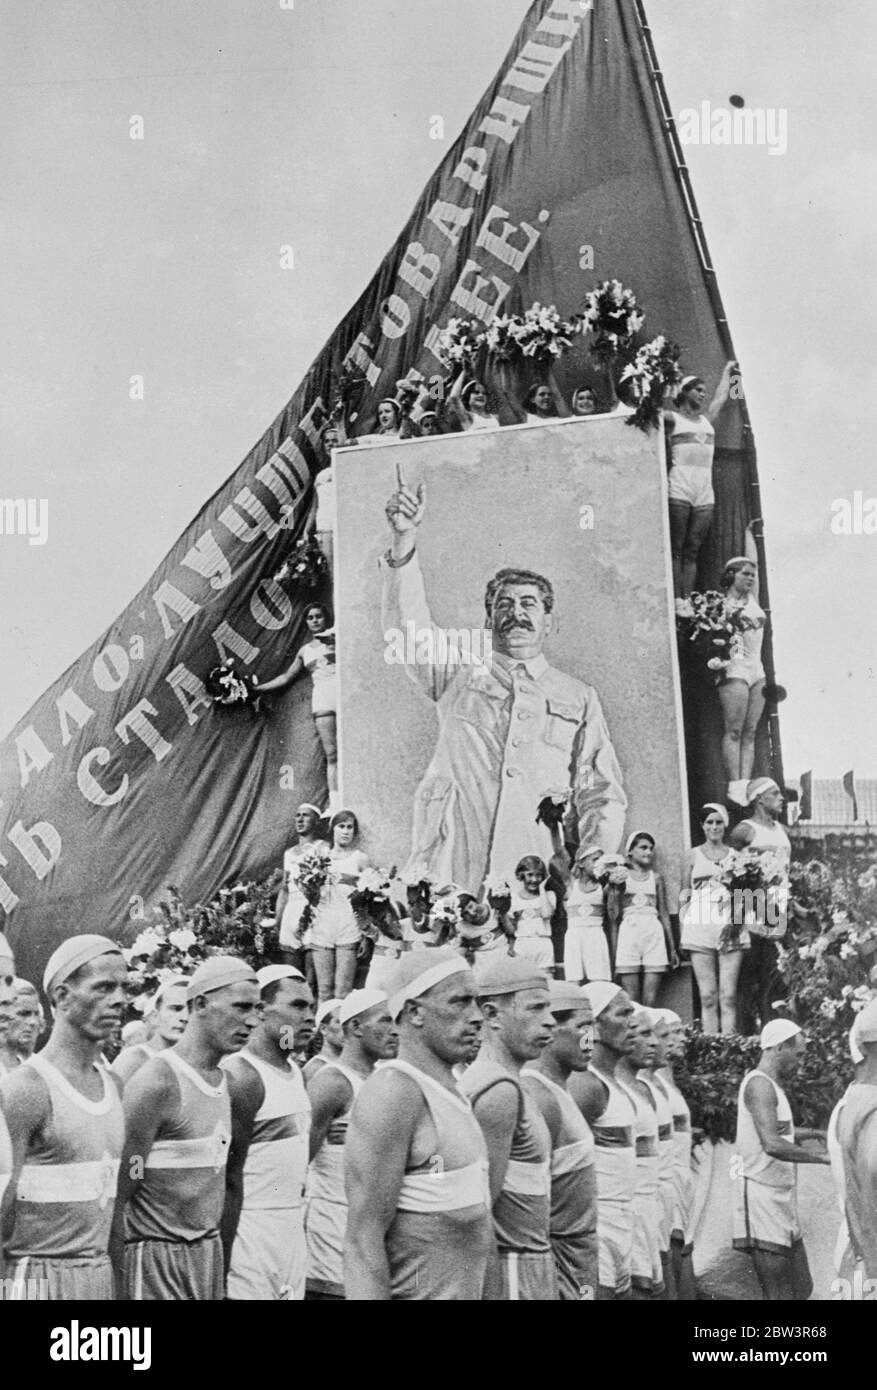 Living banner in Moscow parade of 75 , 000 atheletes . Girl athletes with flowers framed an immense portrait of Joseph Stalin , Soviet dictator , when a great parade of 75 , 000 athletes and children passed over Red Square , Moscow , in celebration of Soviet Constitution Day . The procession took six hours to cross the Square and was watched by Stalin . The celebrations were the gayest seen in Moscow since the Revoluton . This was in accordance with Stalin ' s decree that ' life has become joyous ' . Photo shows , the living banner in the procession of athletes . The inscription is Stalin ' s Stock Photo